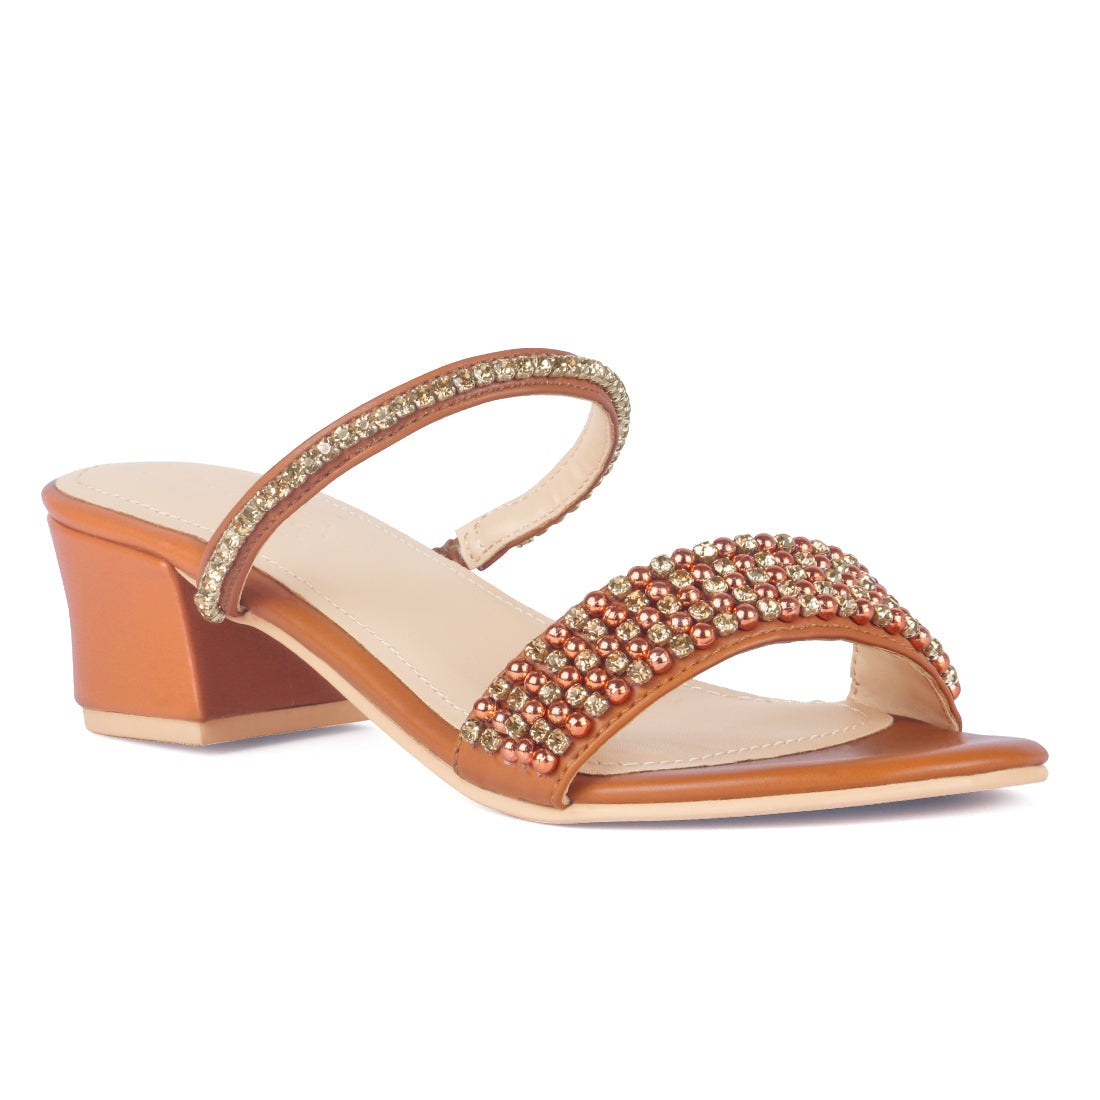 Handcrafted Embellished Sandals in Tan - Tan